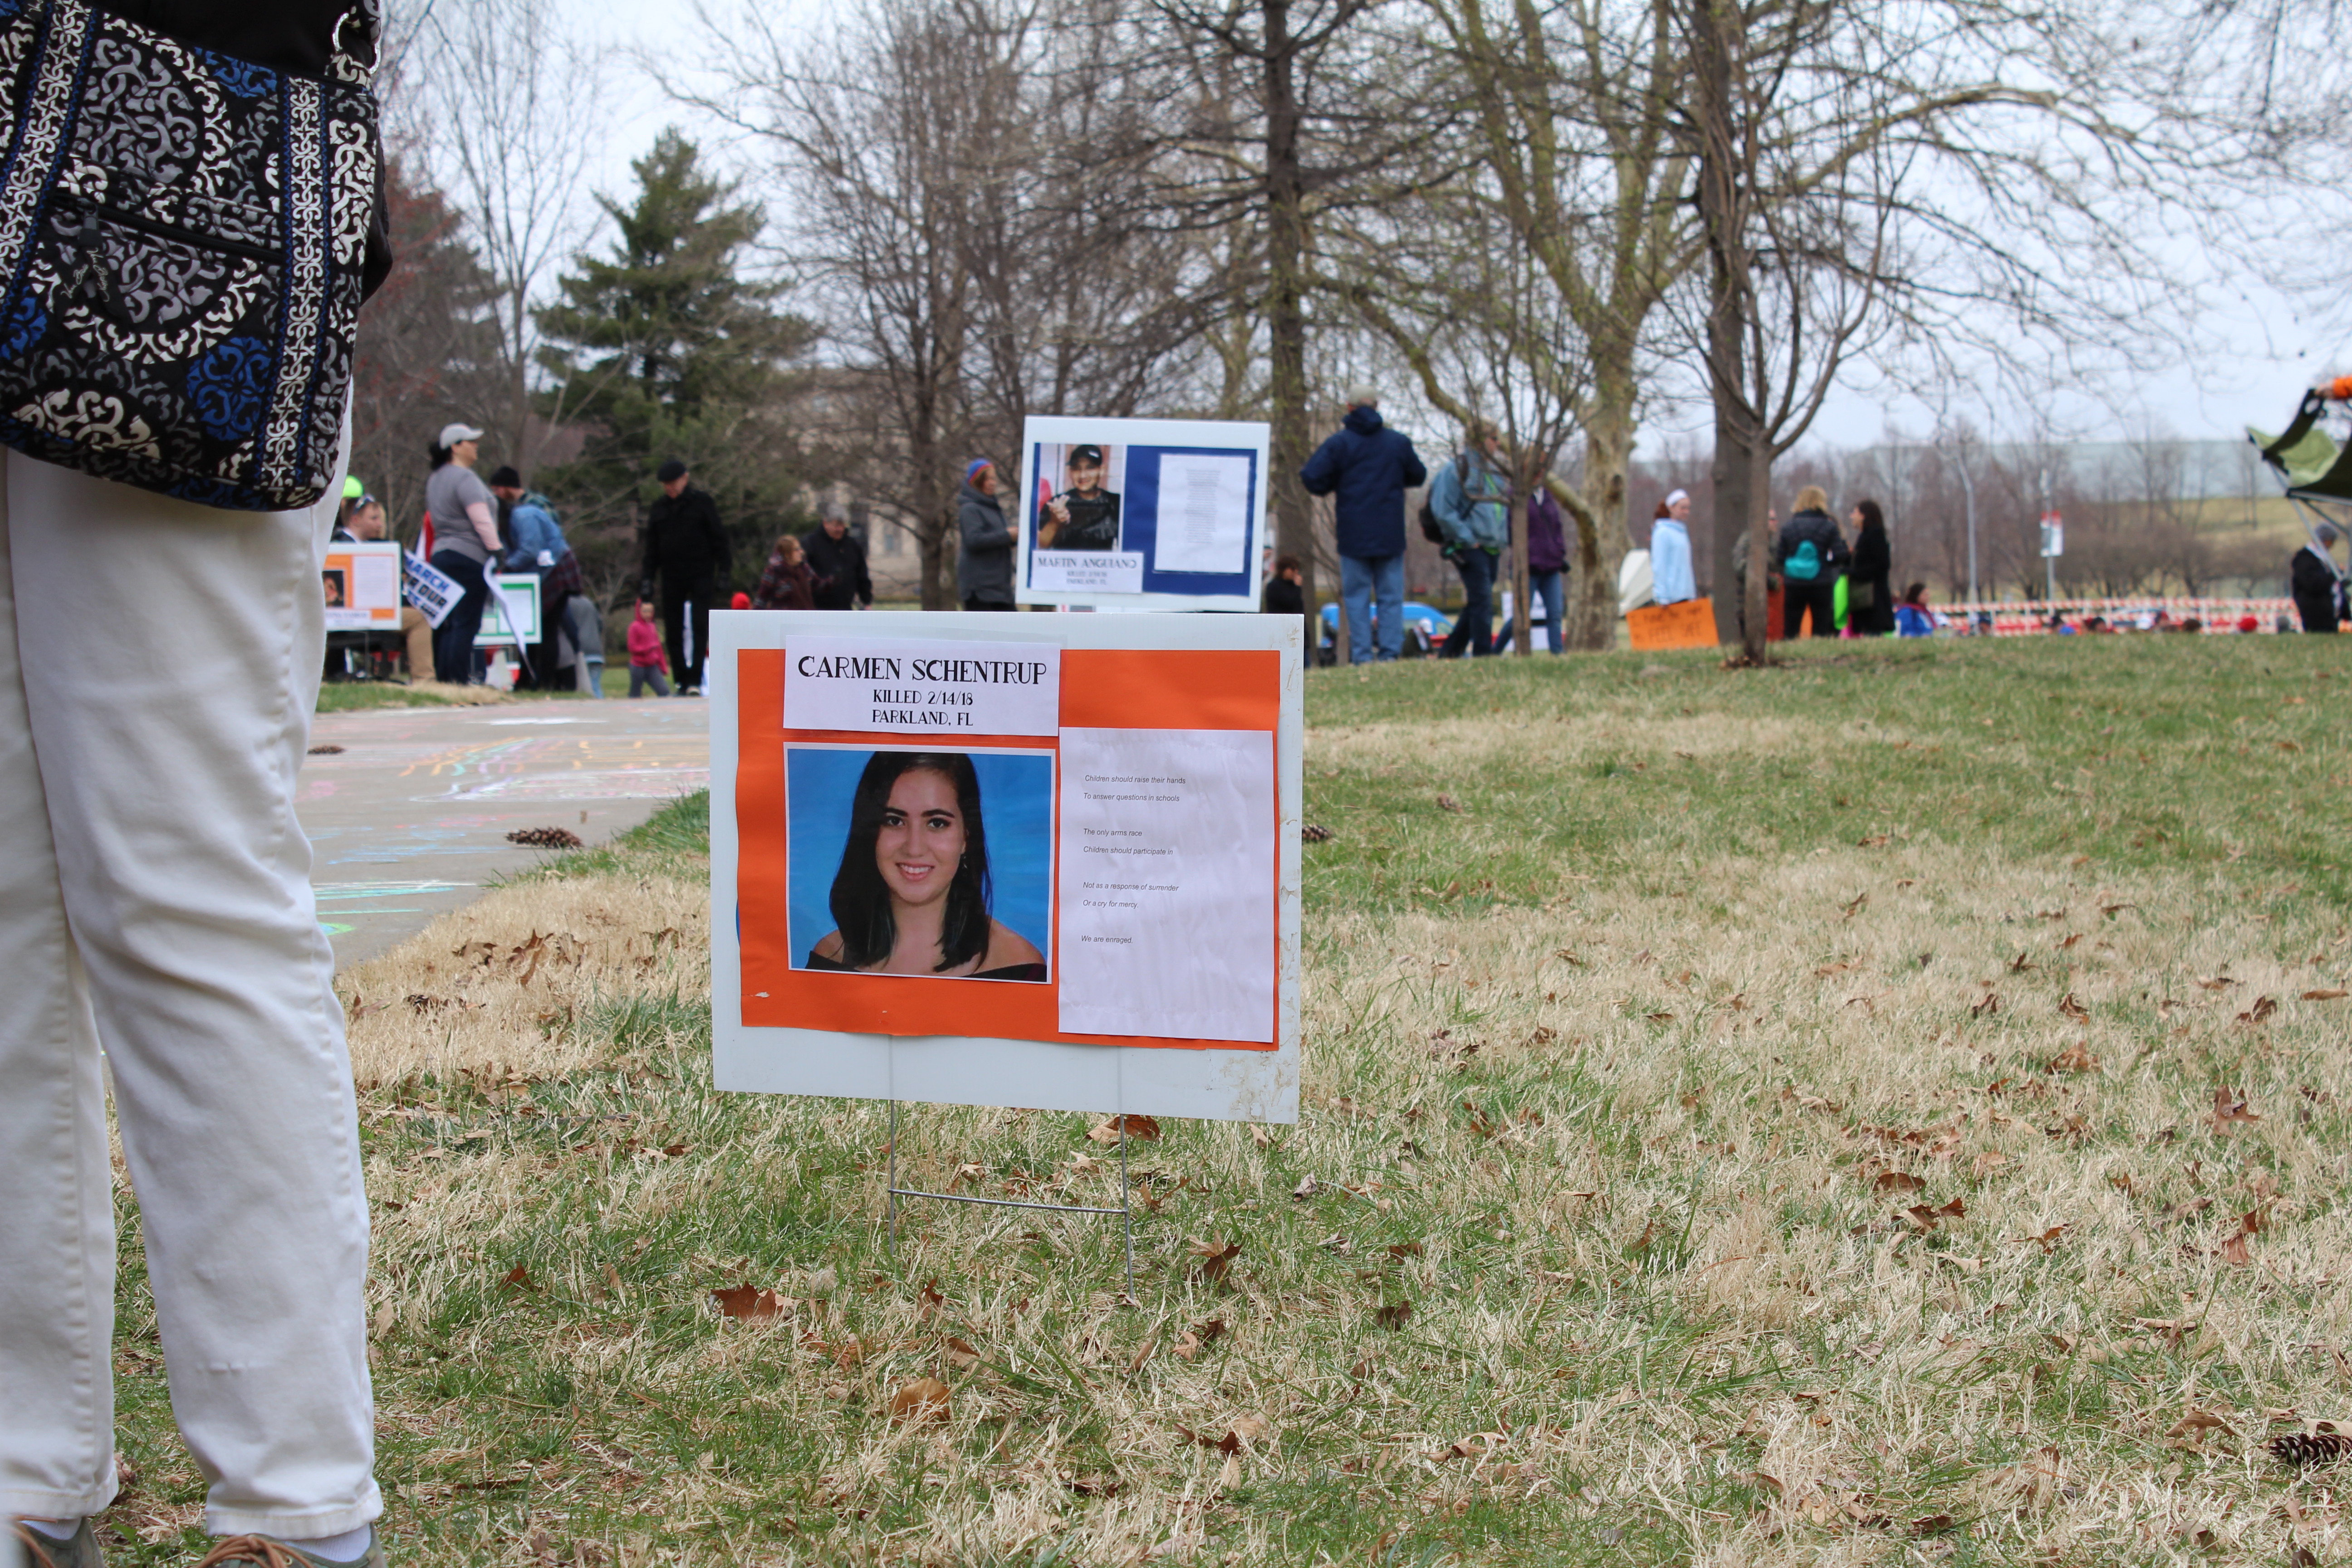 On the sidewalk where the March would officially start, colored signs with portraits of each victim from the Parkland, Florida shooting lined each side, being a stark reminder of the reason why the March had formed in the first place. Photo: Carina Smith, 14 East.